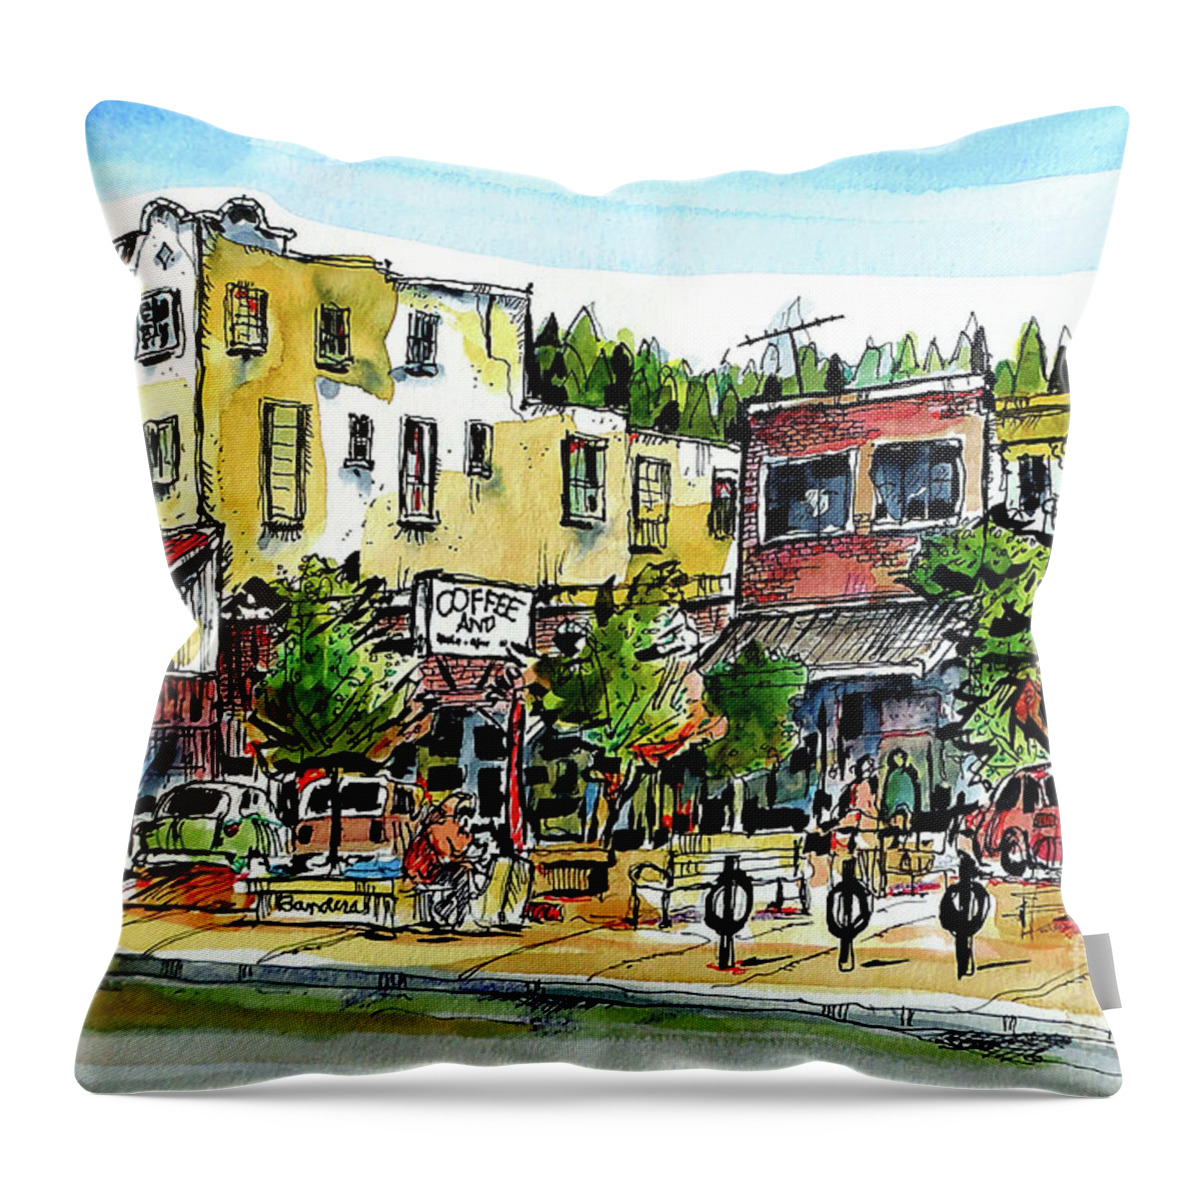 Truckee Throw Pillow featuring the painting Sketch Crawl In Truckee by Terry Banderas